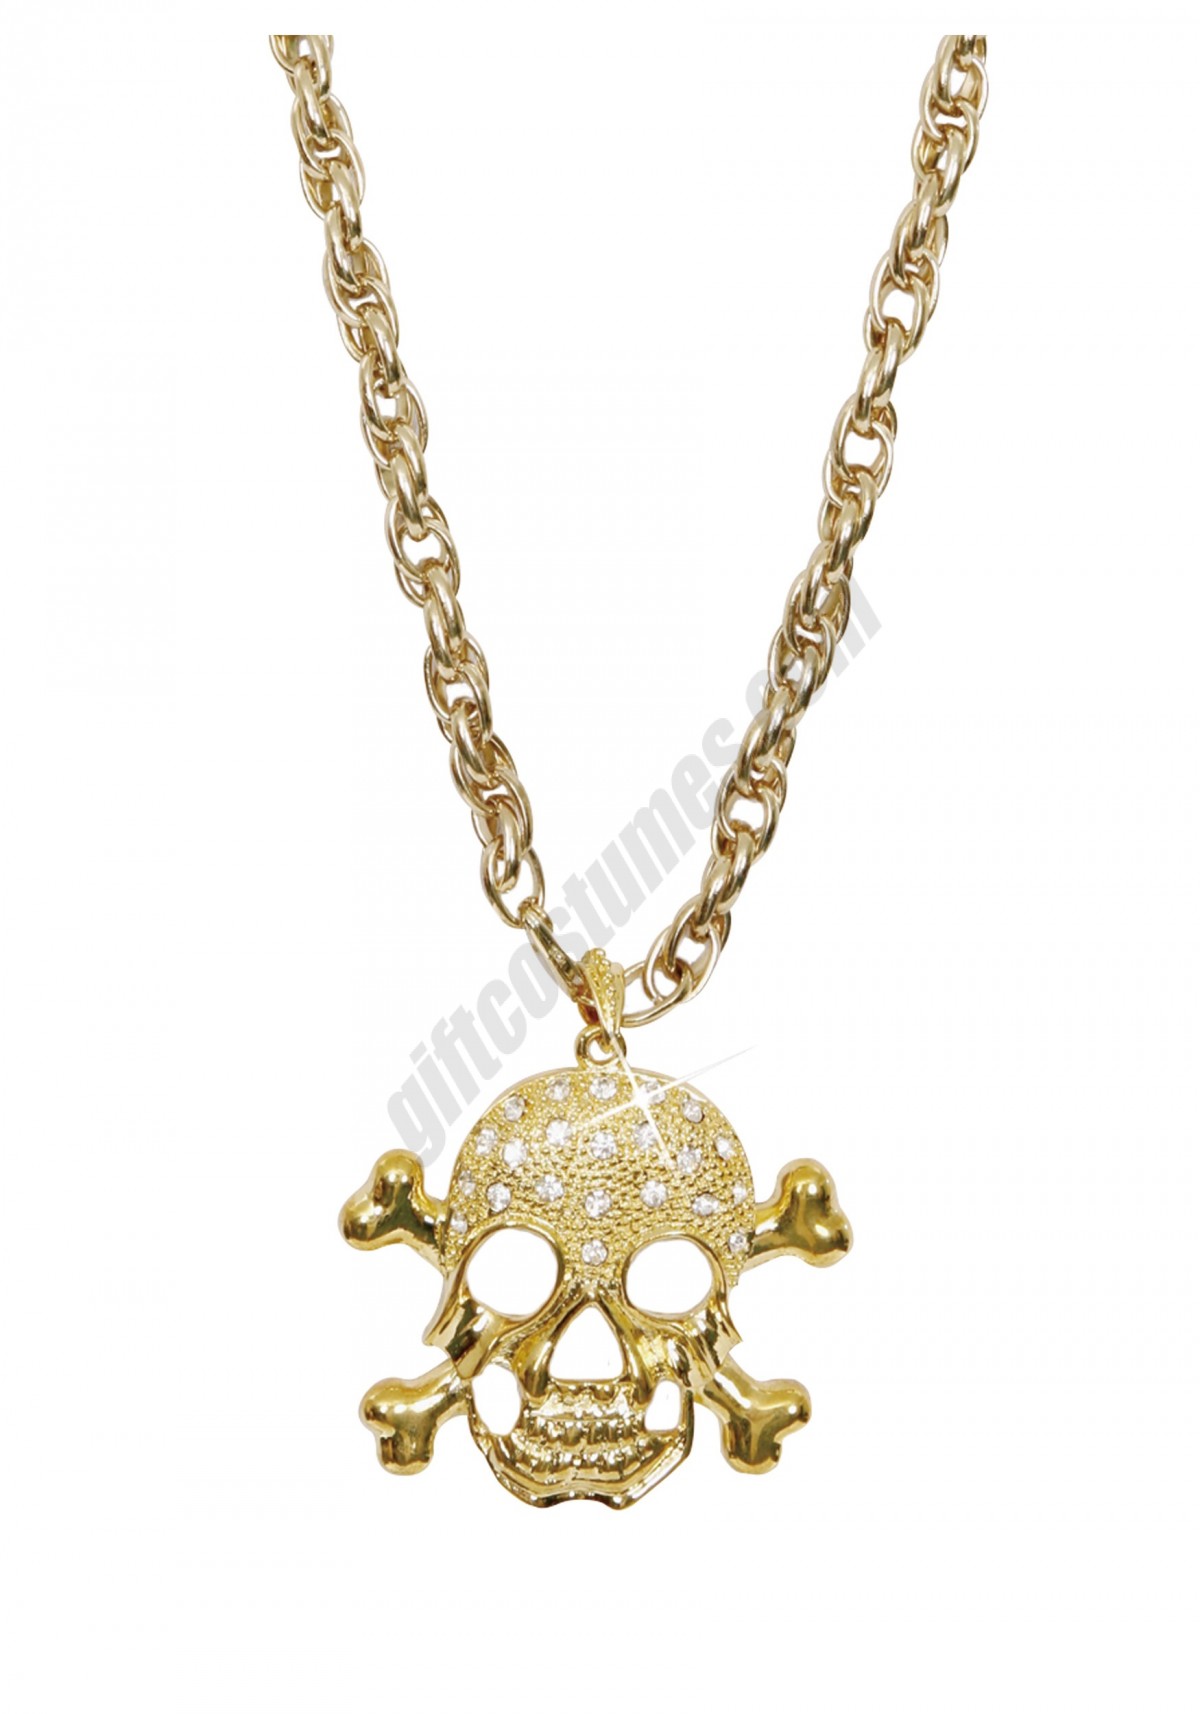 Gold Pirate Necklace Promotions - -0